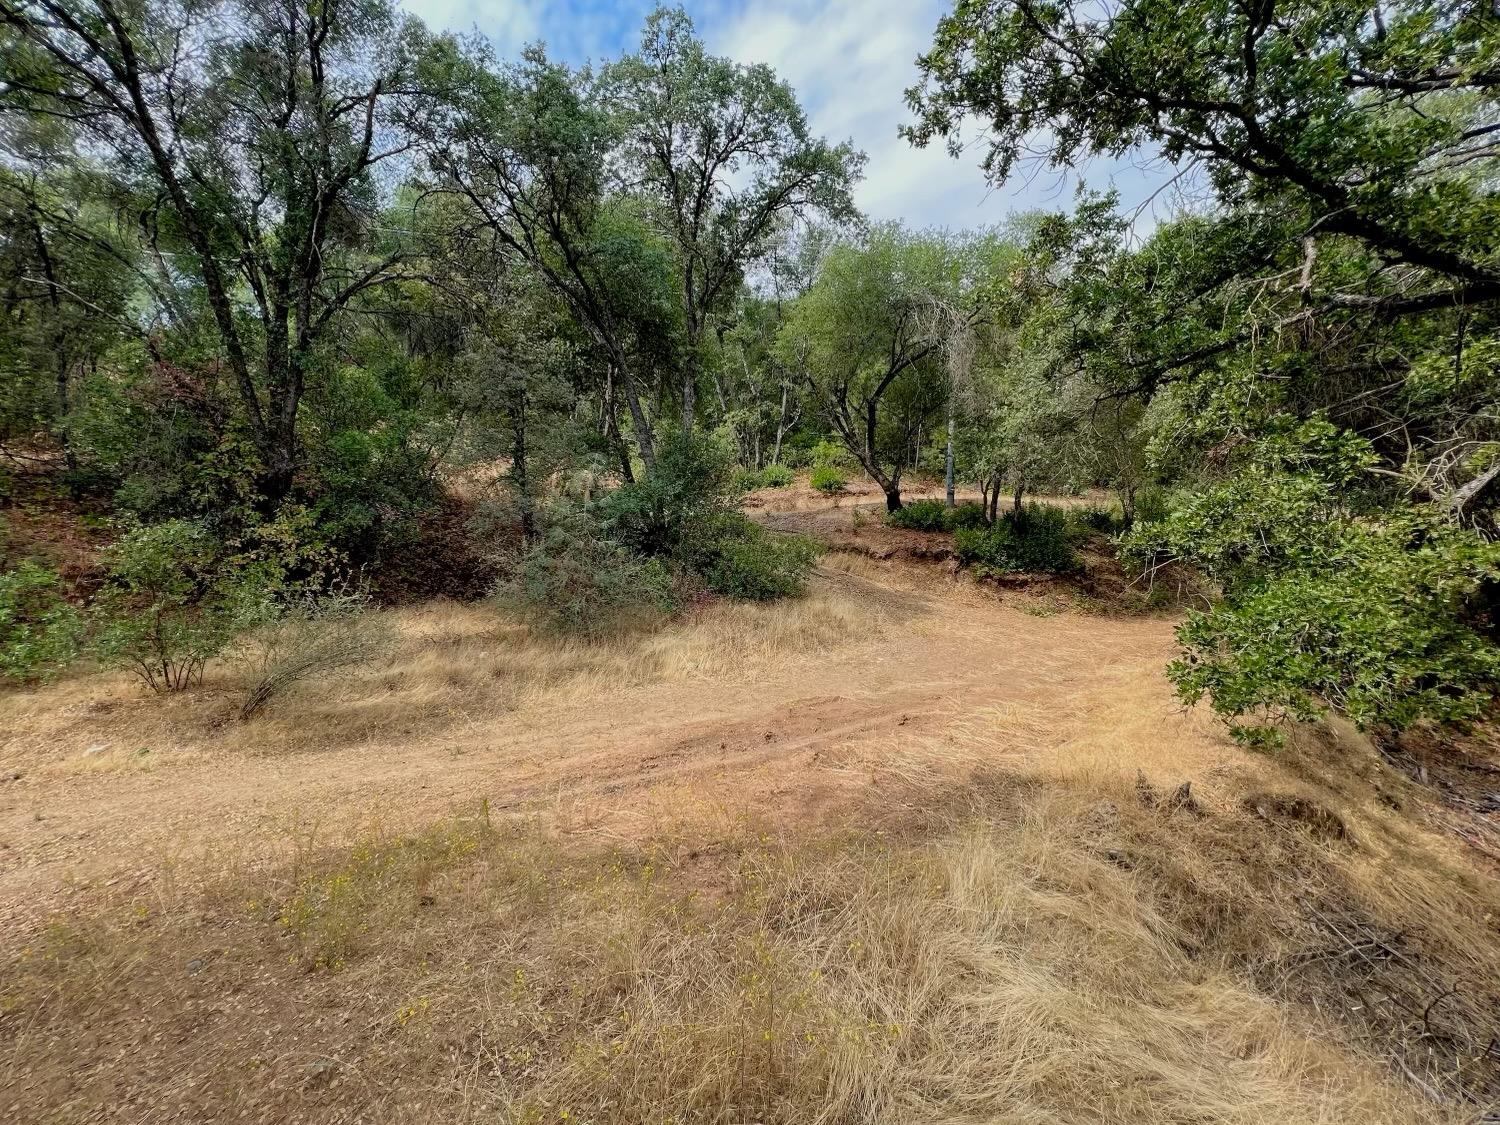 Photo of 10 Ac Miller Rd / Old Hwy in Mariposa, CA